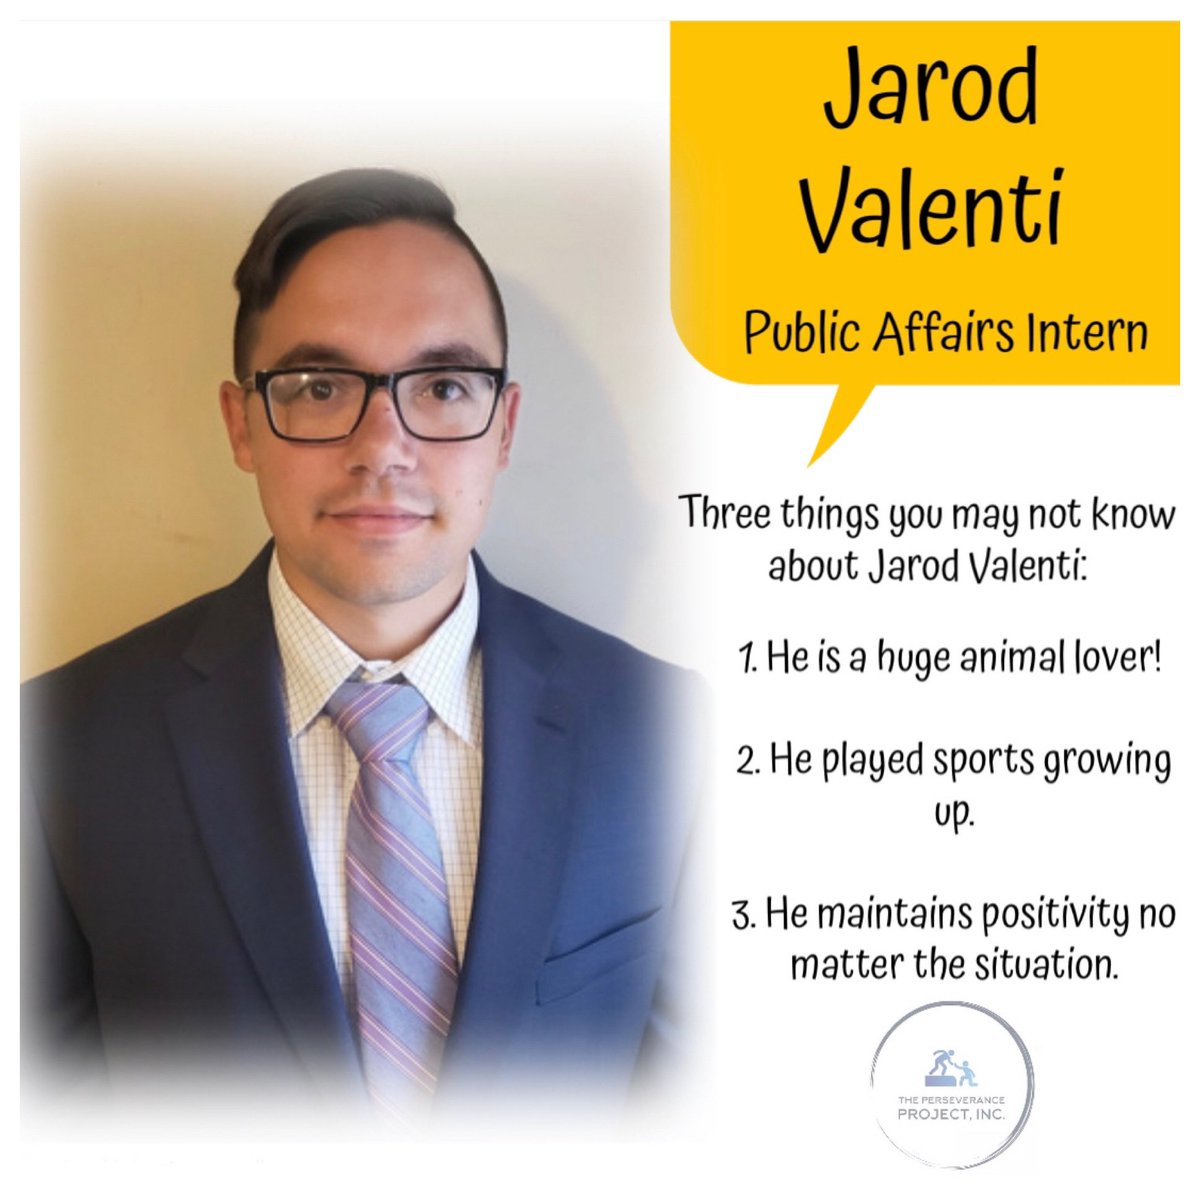 Jarod Valenti will soon be a graduate of Rowan University where he will be obtaining a degree in Law and Justice, along with a Certificate of Ethics. #theperseveranceproject #tppinc #camdennj #nonprofit #juvenilejustice #criminaljustice #justicereform